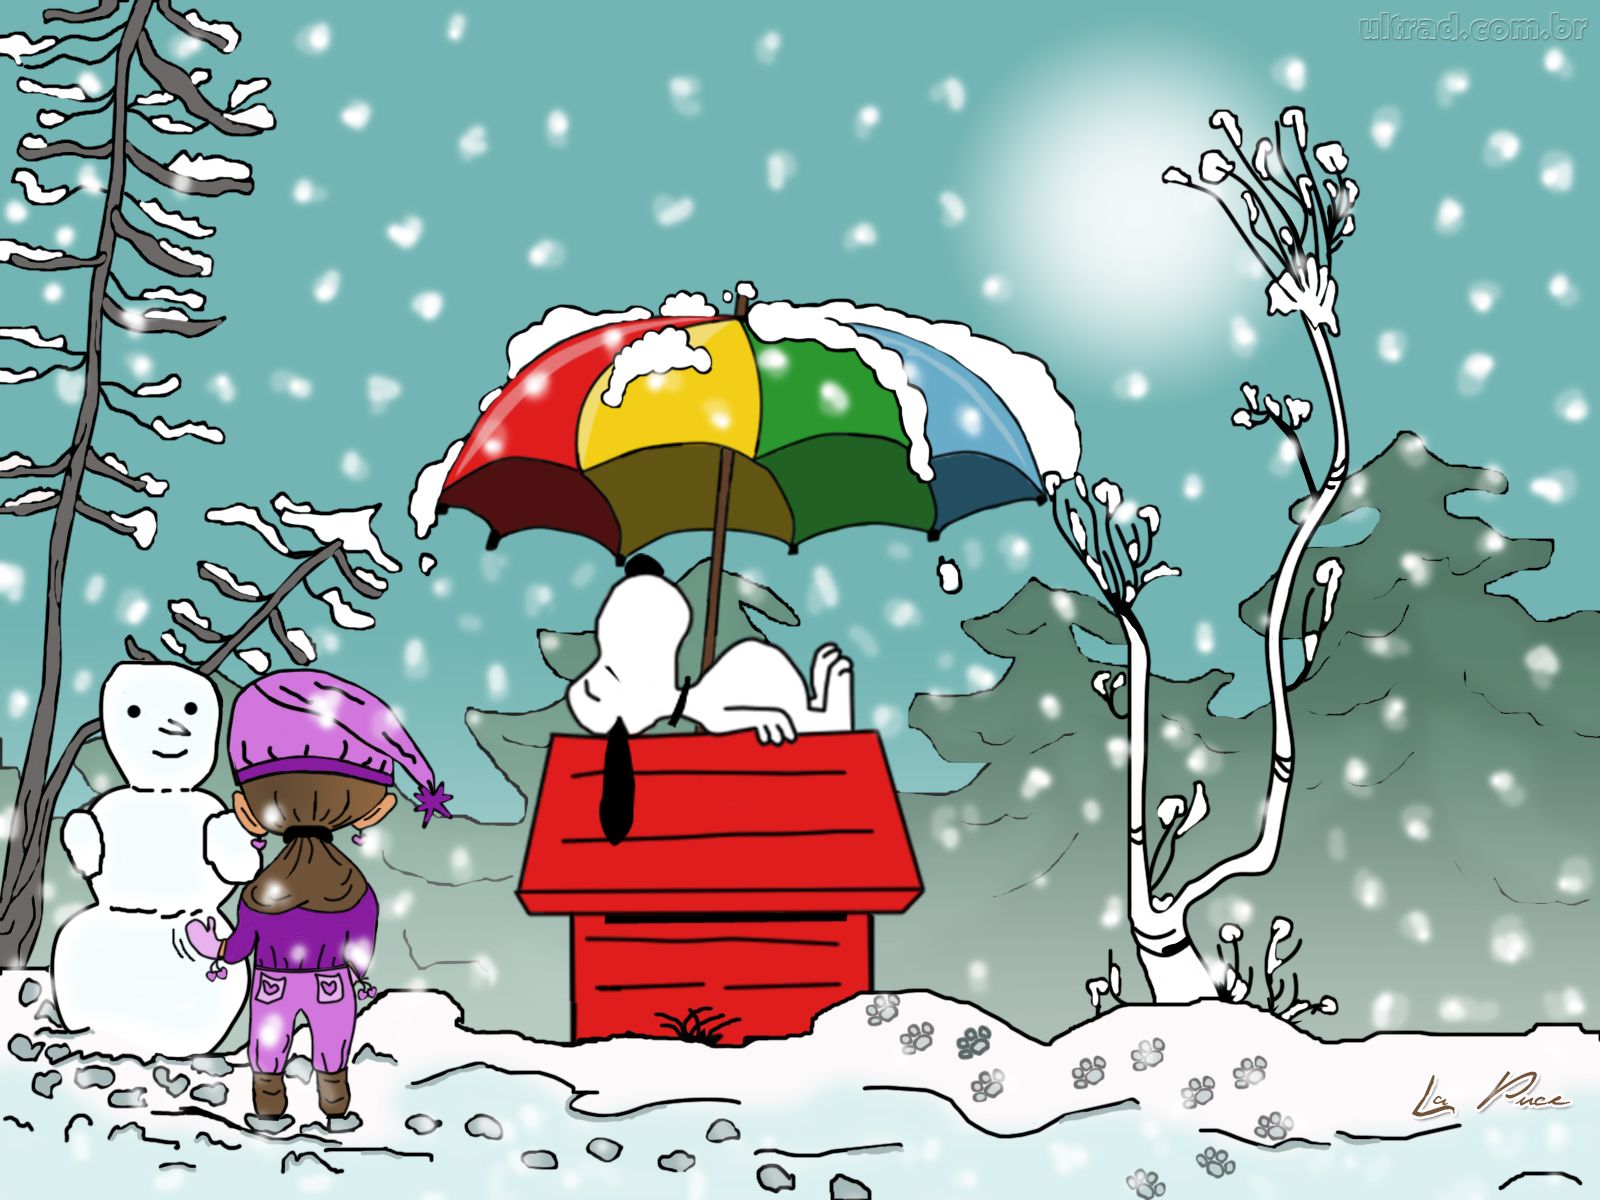 charlie brown snoopy snow holiday wallpaper 1600x1200